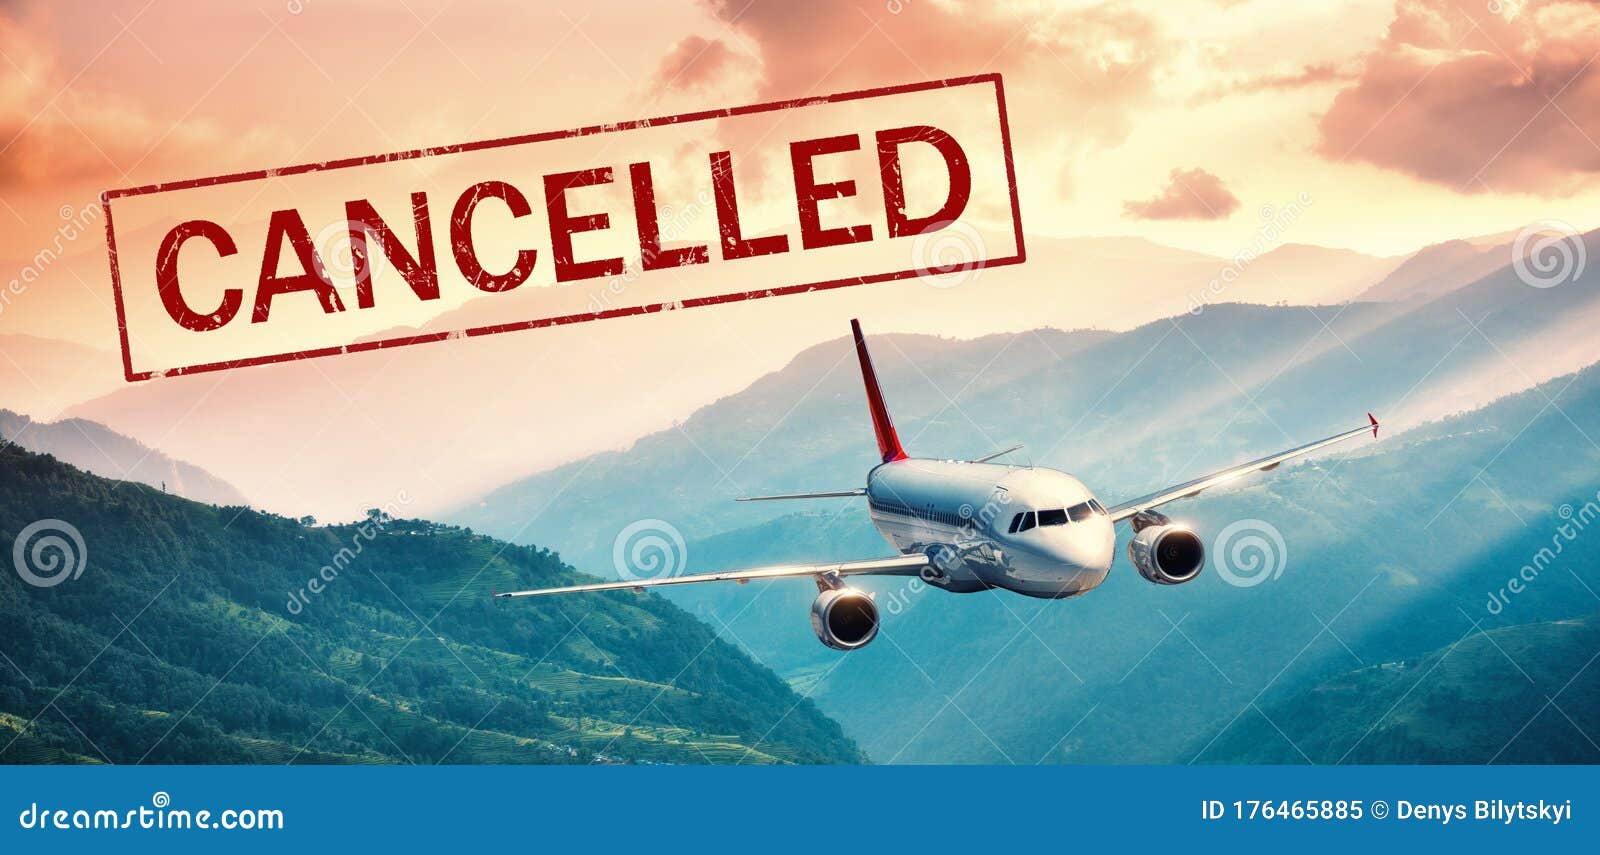 airplane and flight cancellation. canceled flights